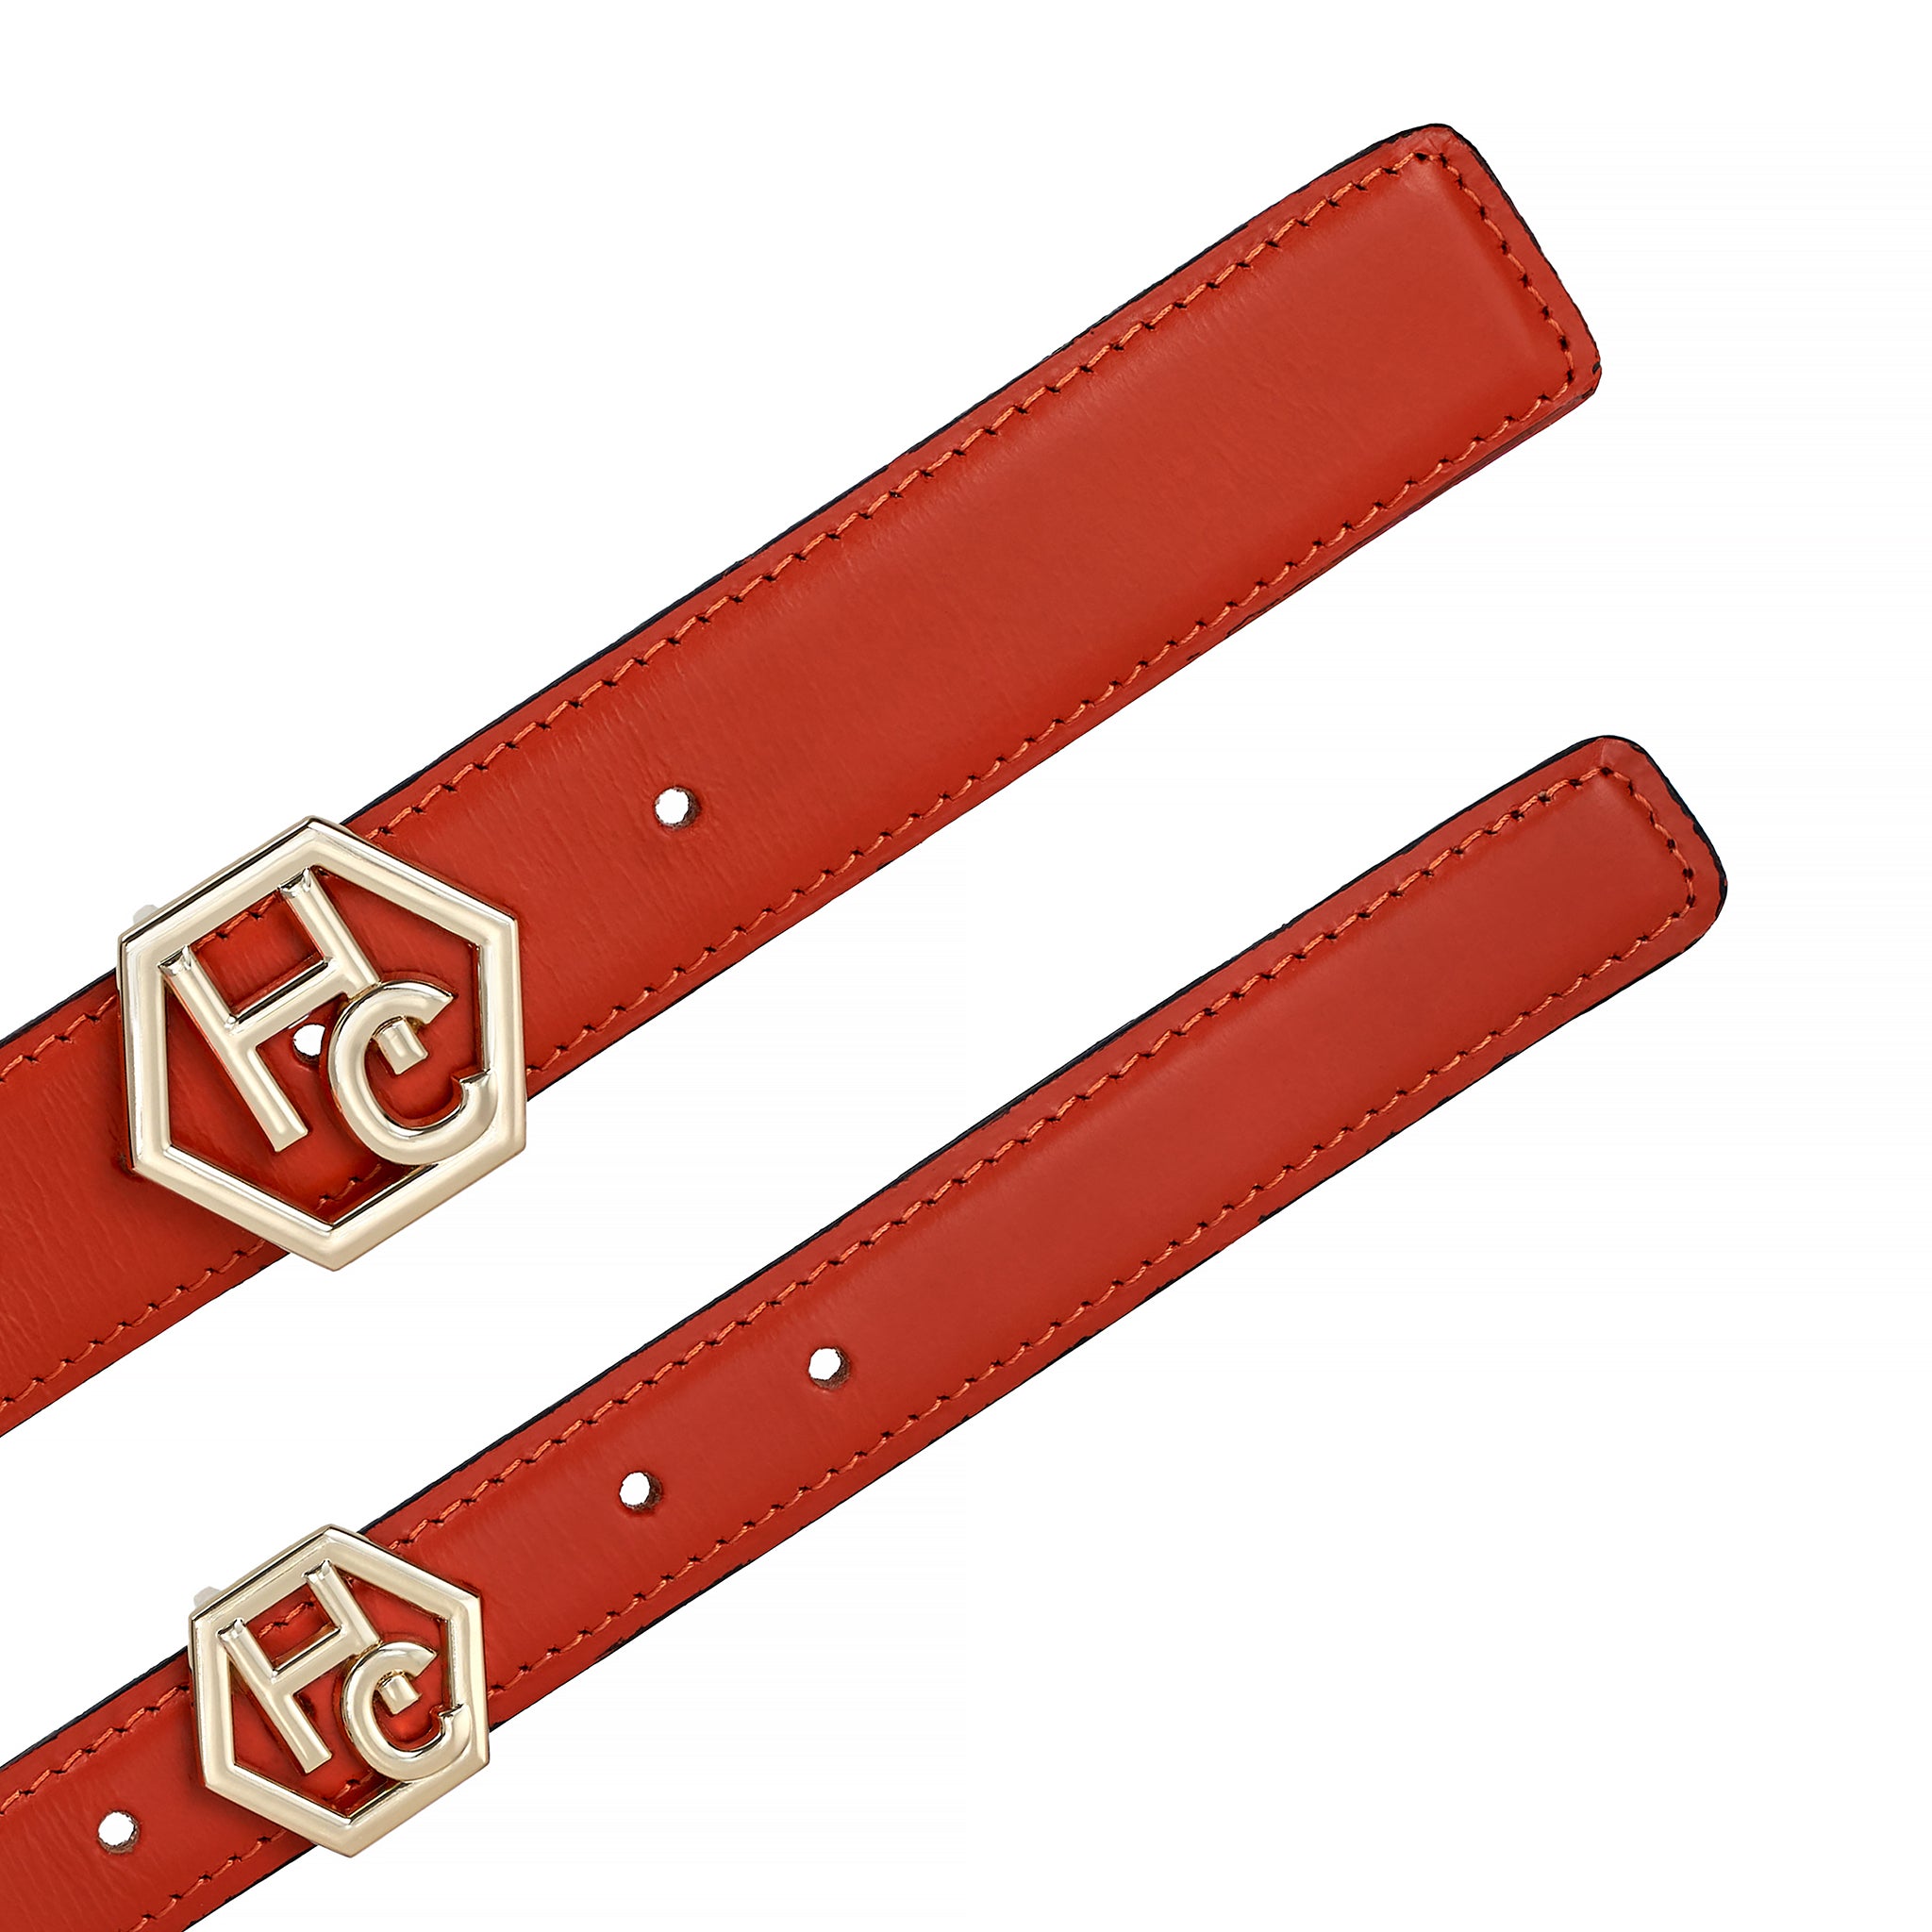 Hedonist Chicago Reversible Red Leather Belt 1.3" 32381073490071